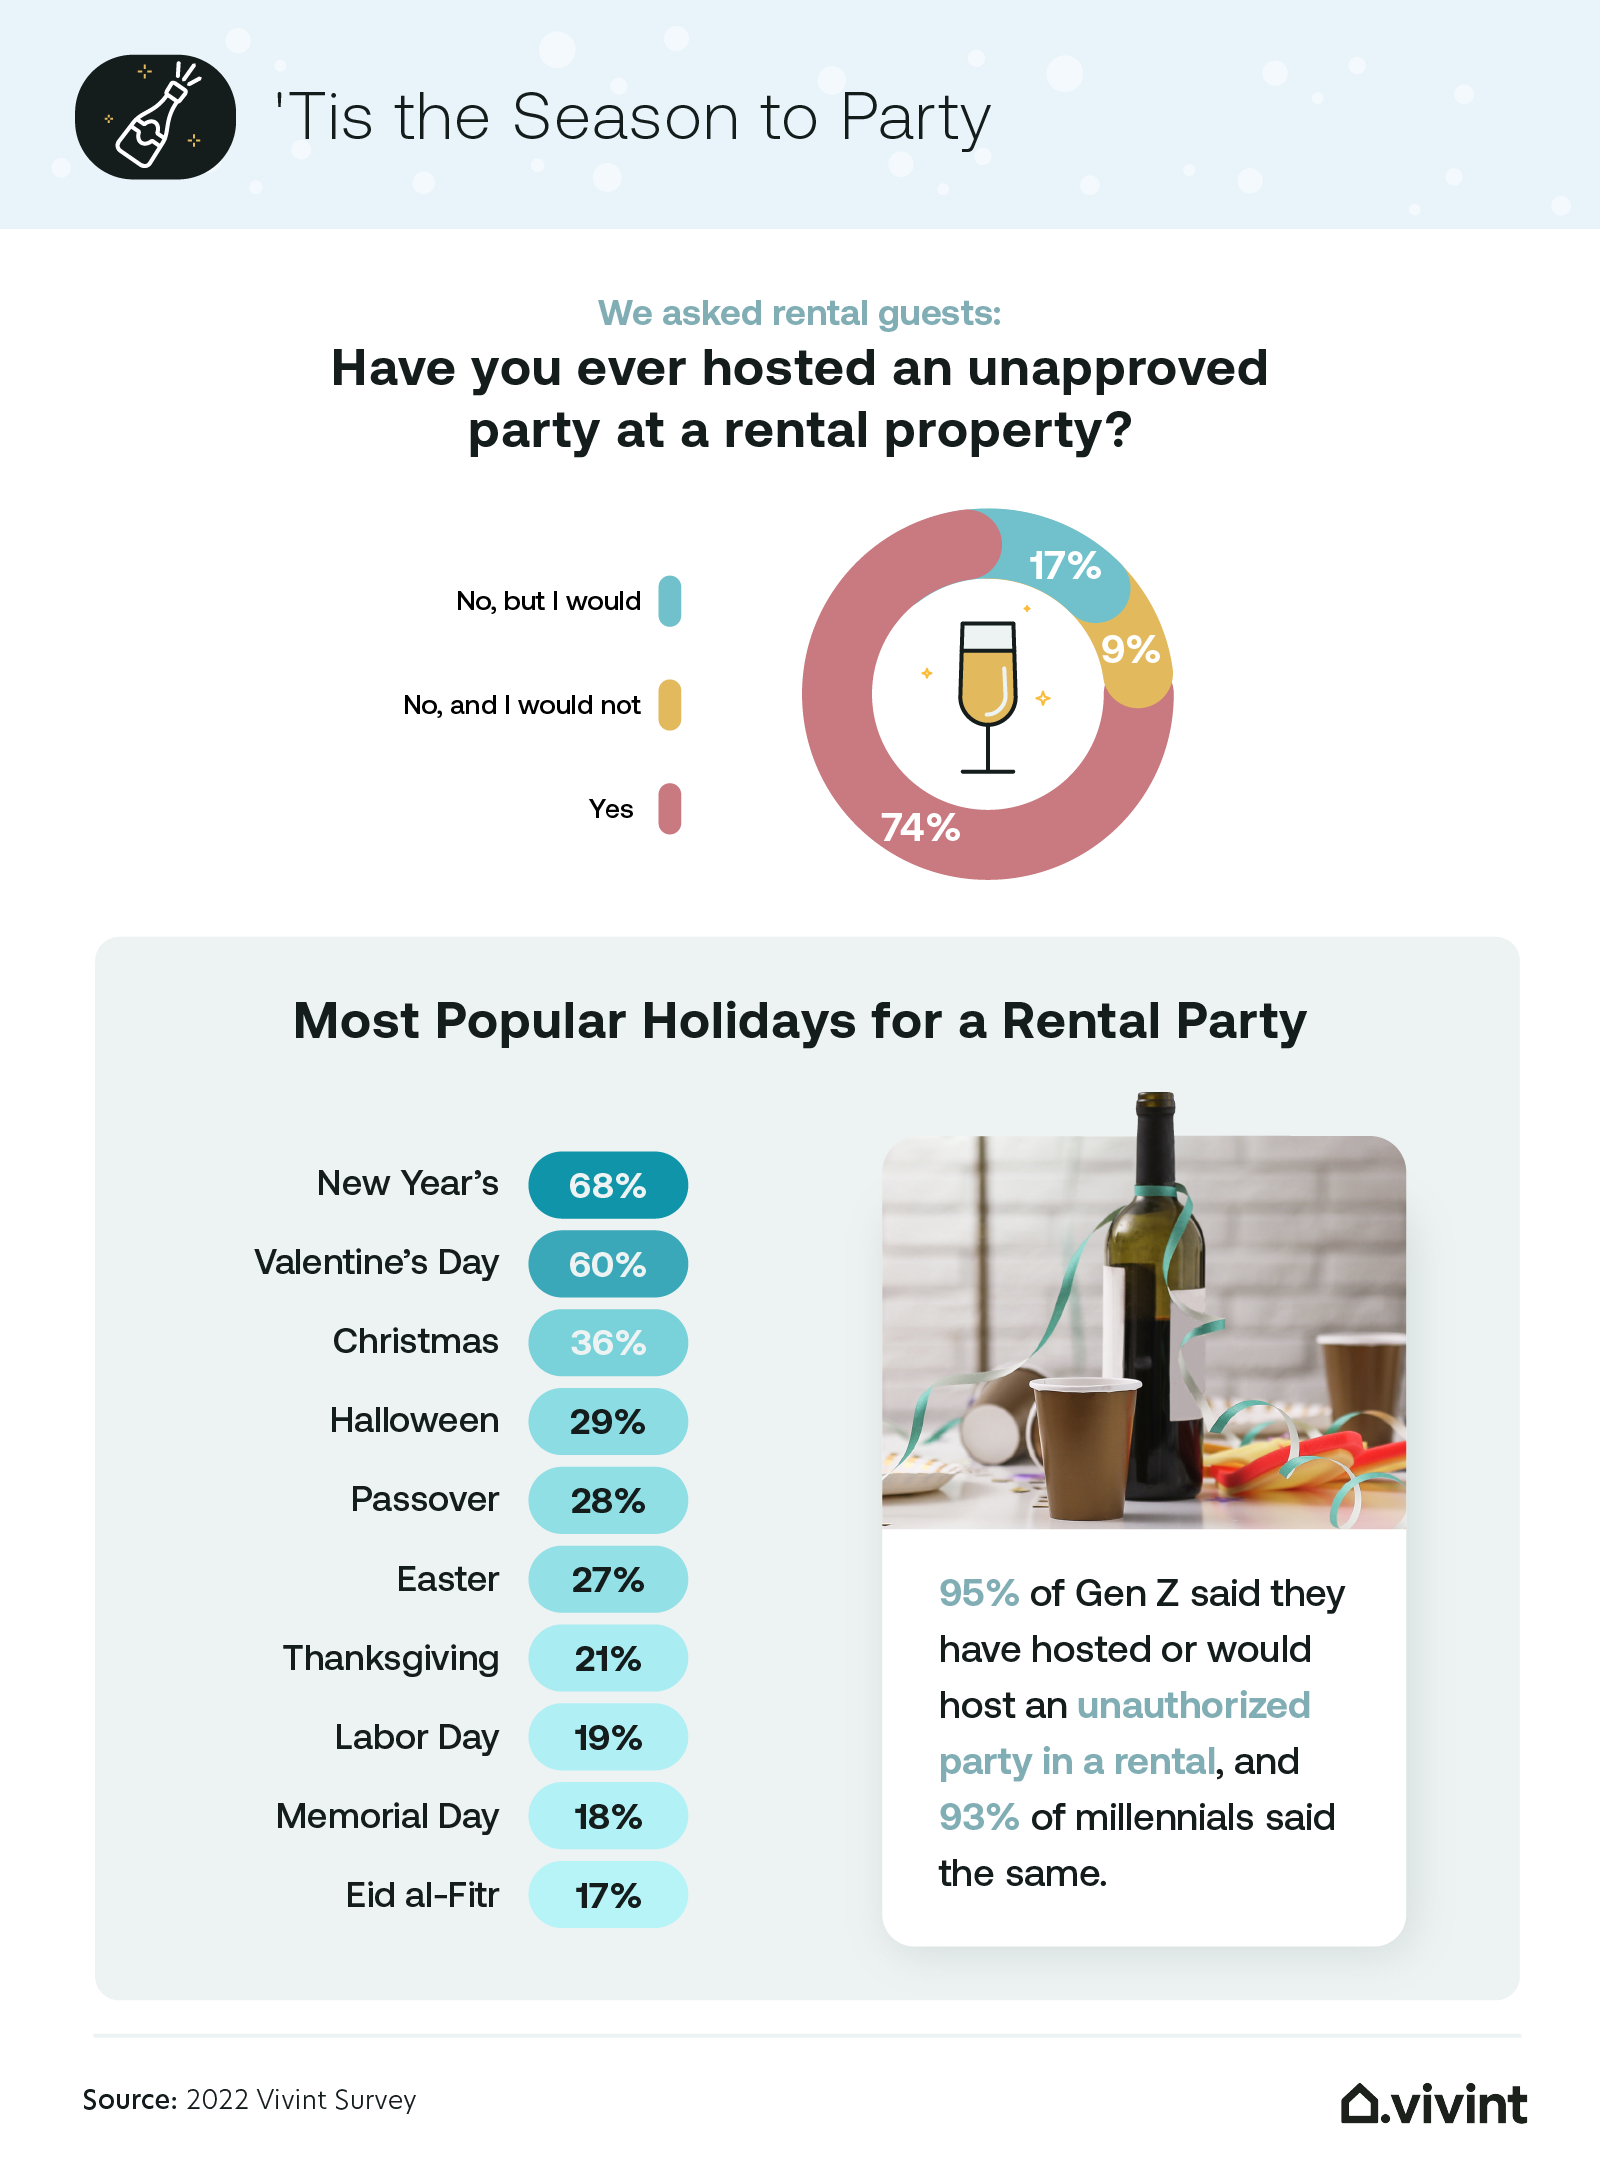 Information about whether or not people have hosted an unapproved party at a rented property.